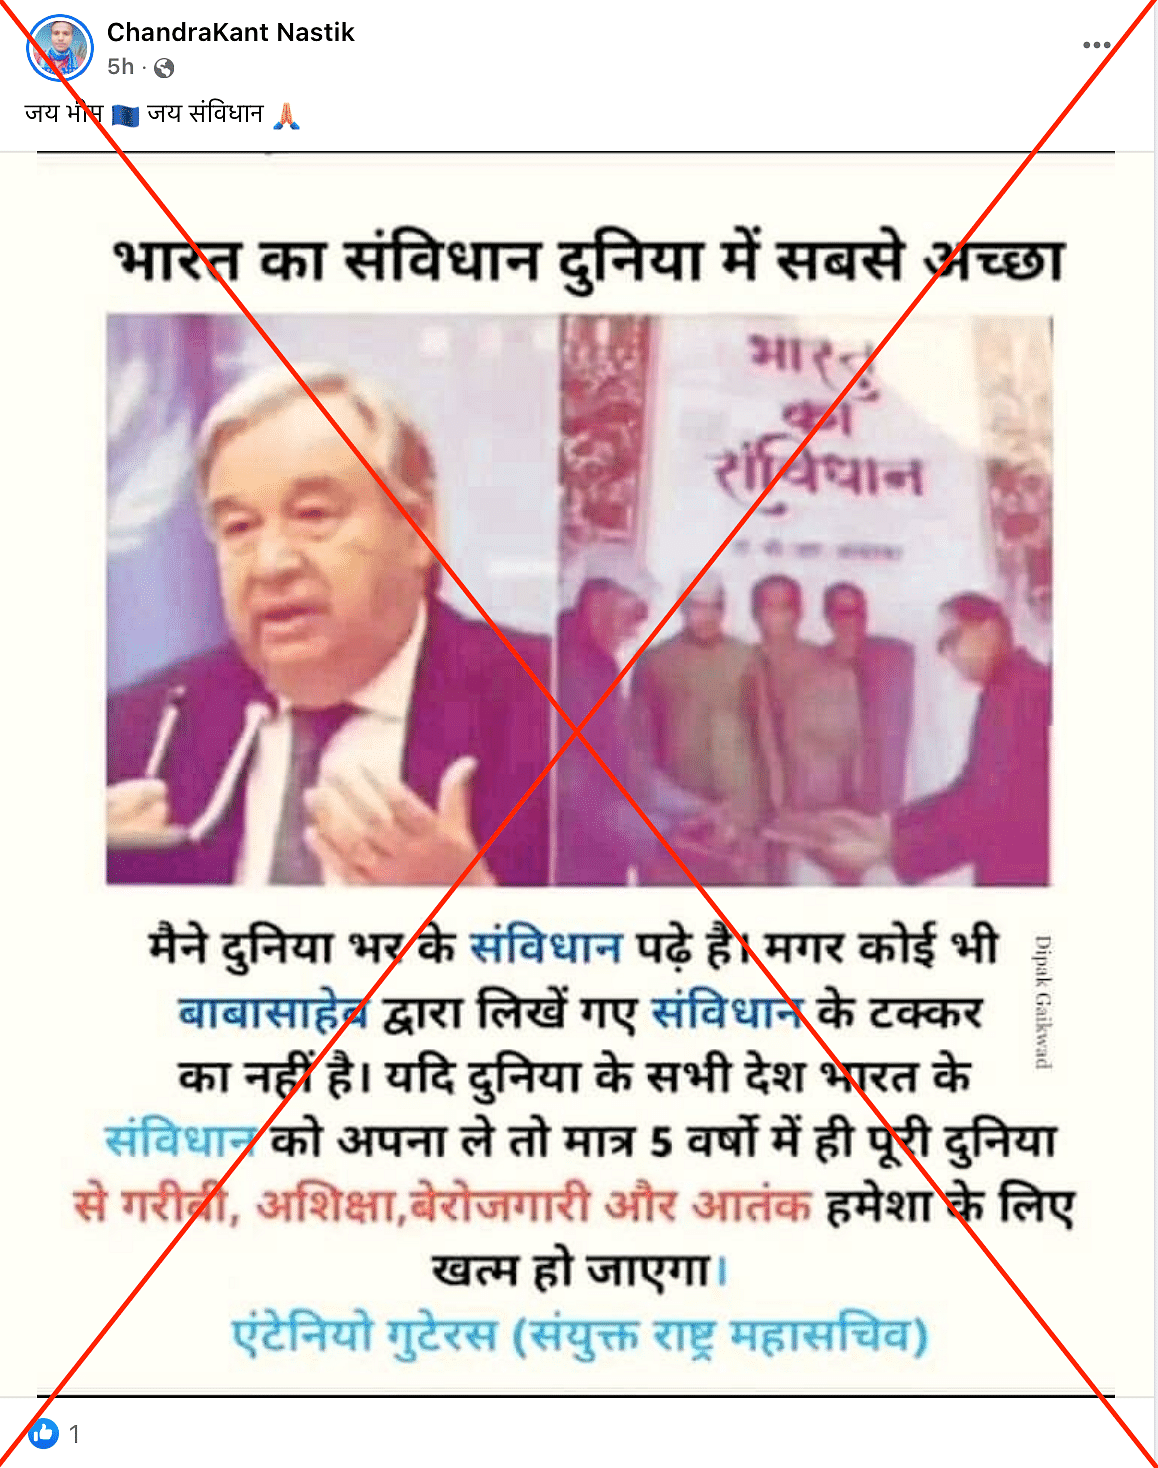 There is no proof which shows that UN Secretary General Antonio Guterres spoke about Ambedkar and the Constitution.